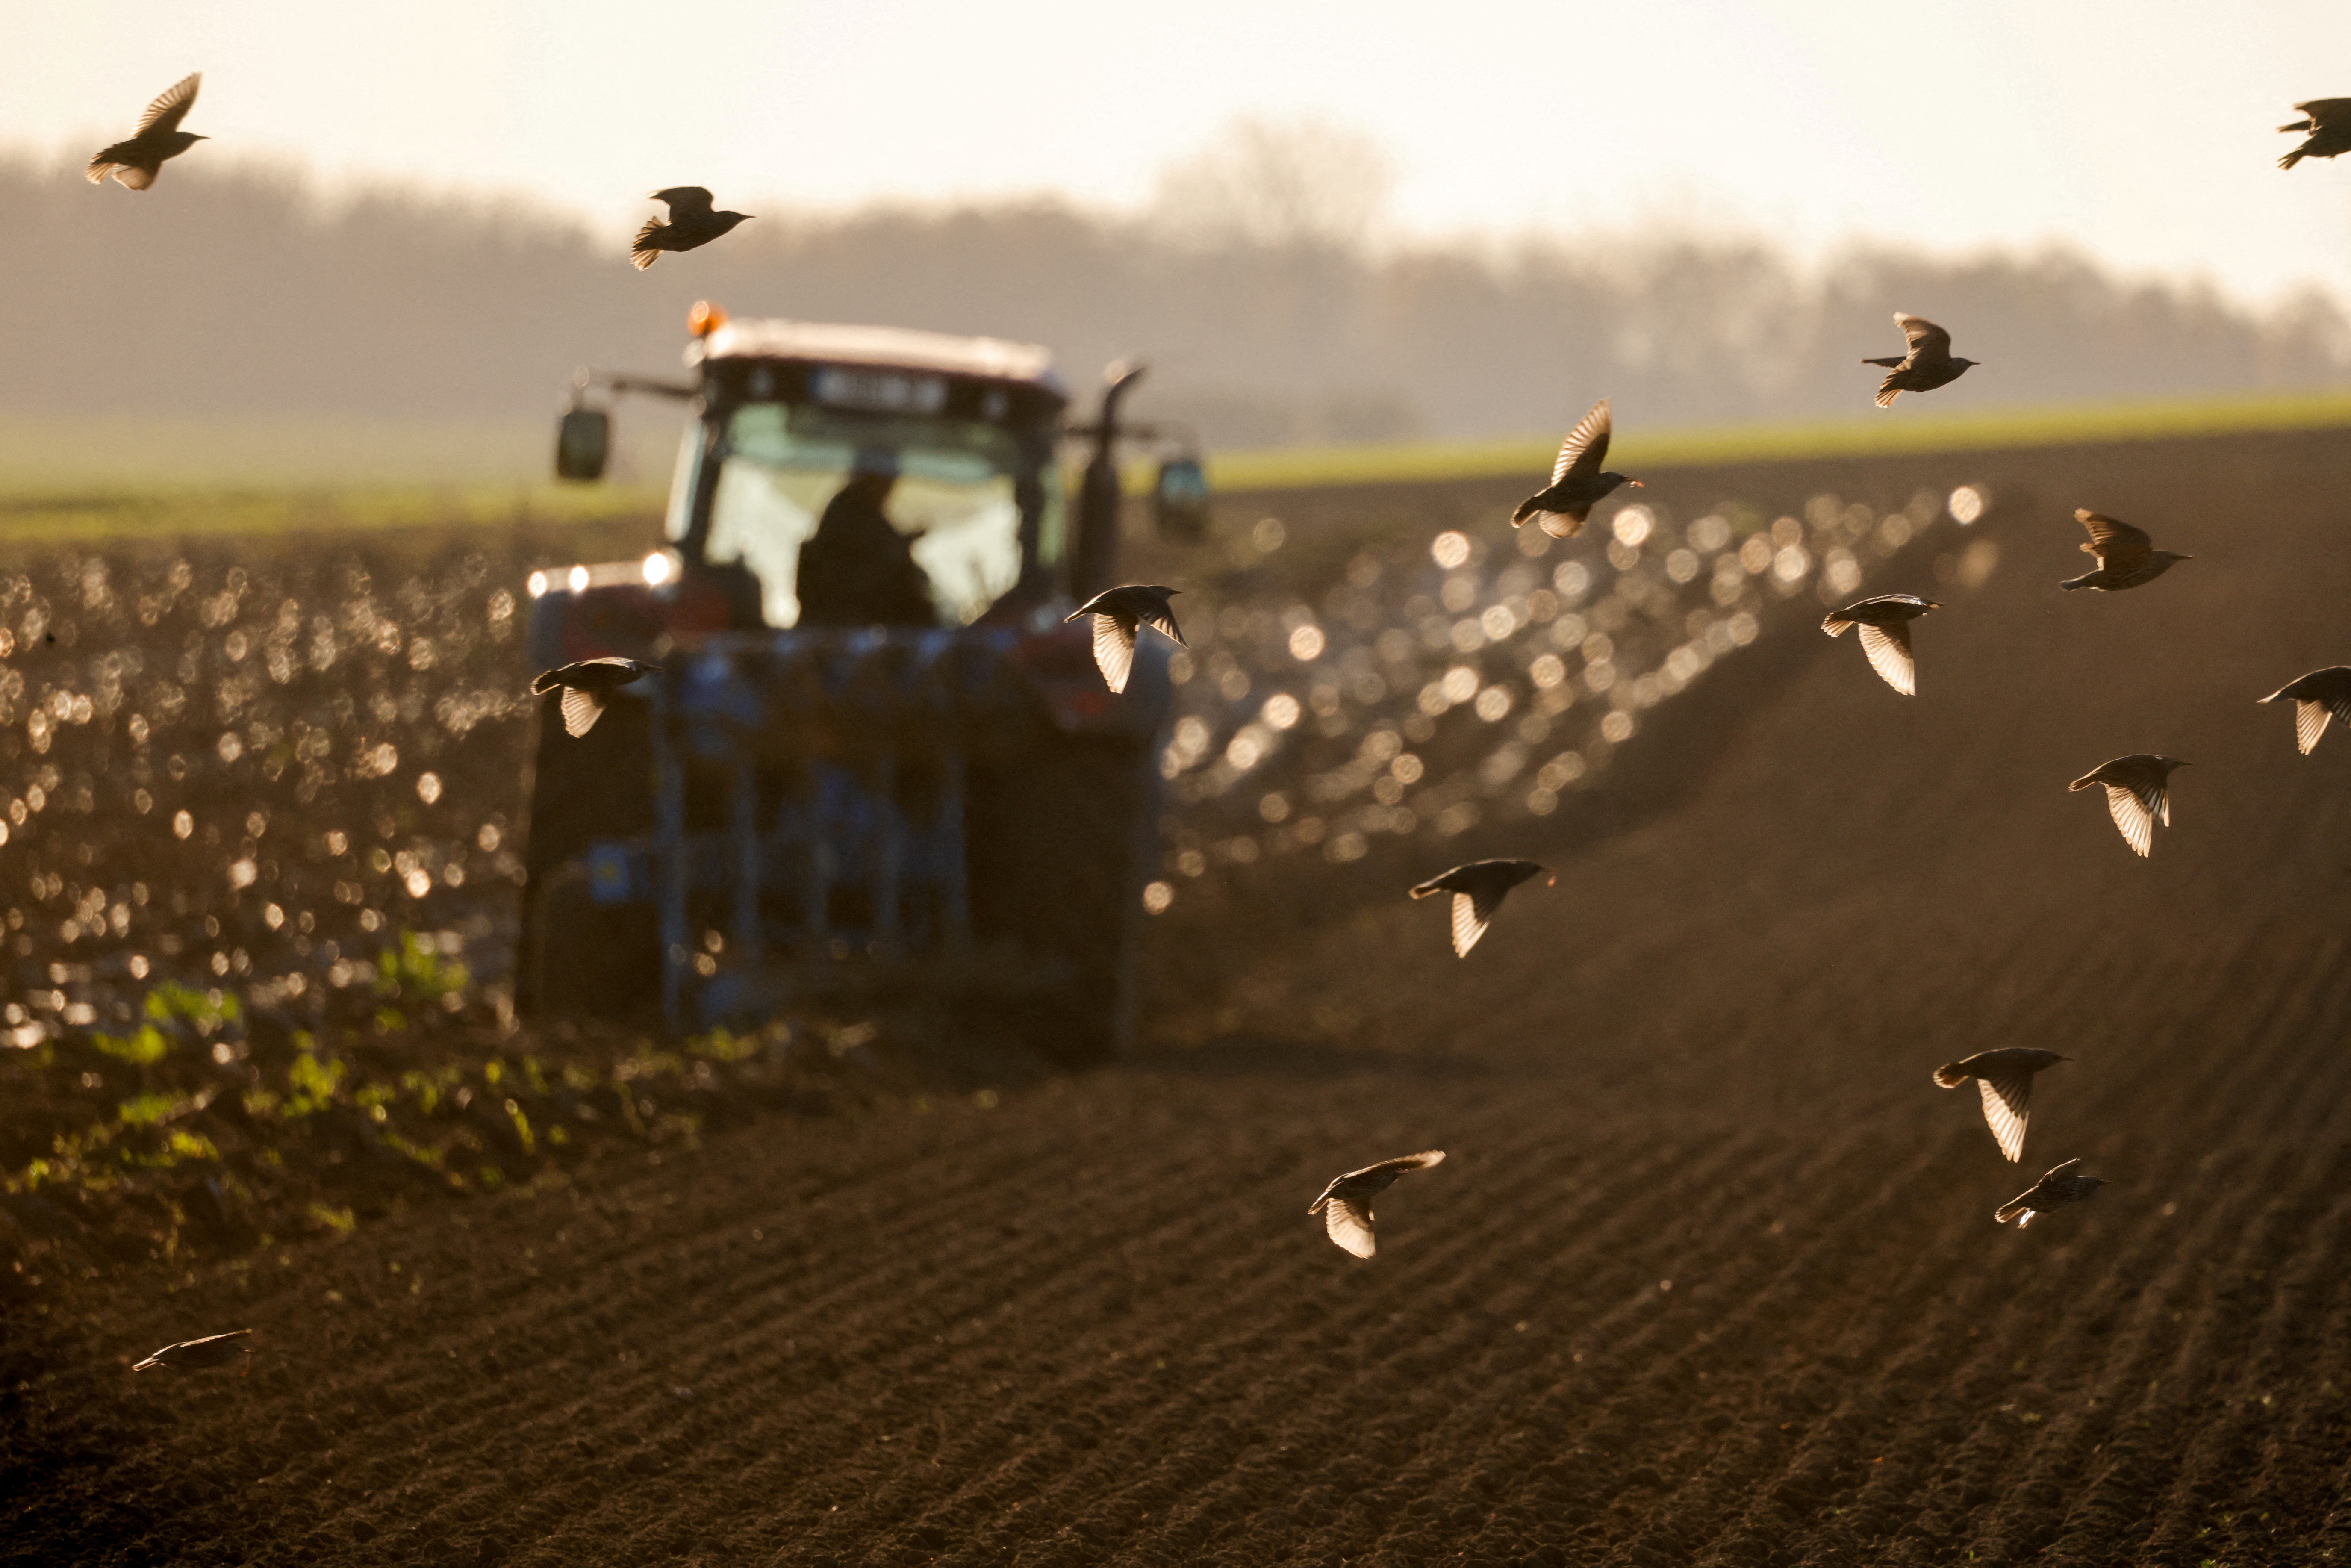 Starlings fly over a tractor as french farmer plows his field in Haynecourt